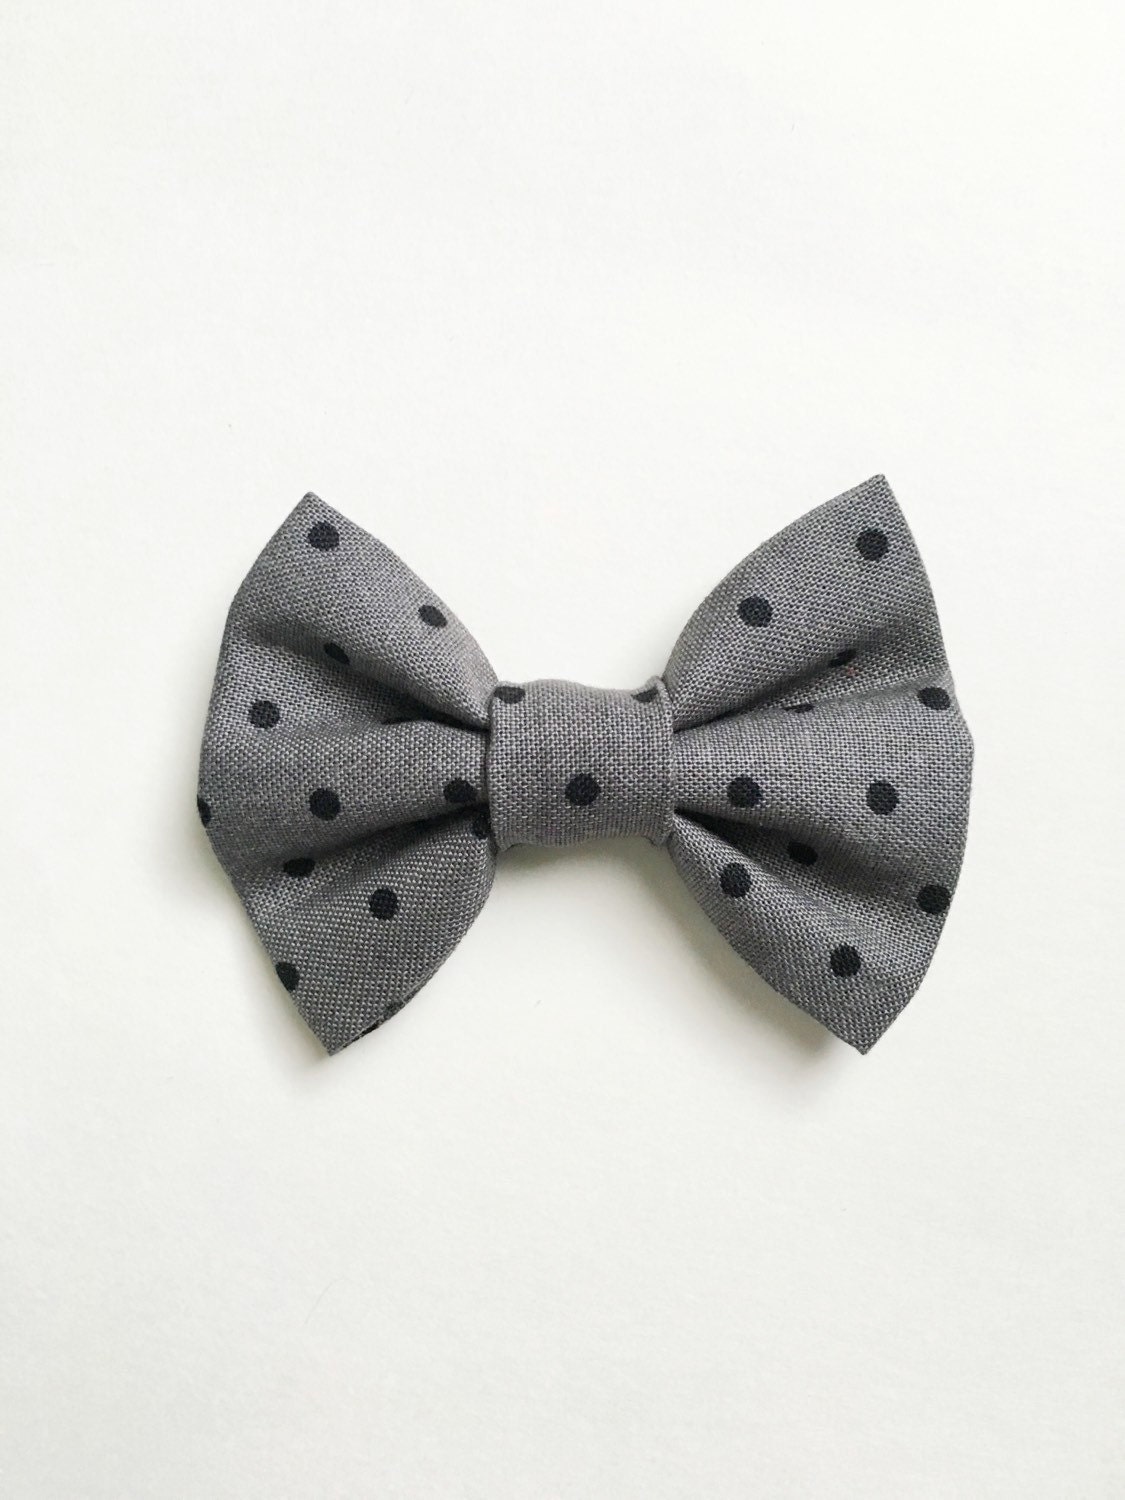 Baby Bow Tie Newborn Bow Tie Gray Toddler Bow Ties Baby